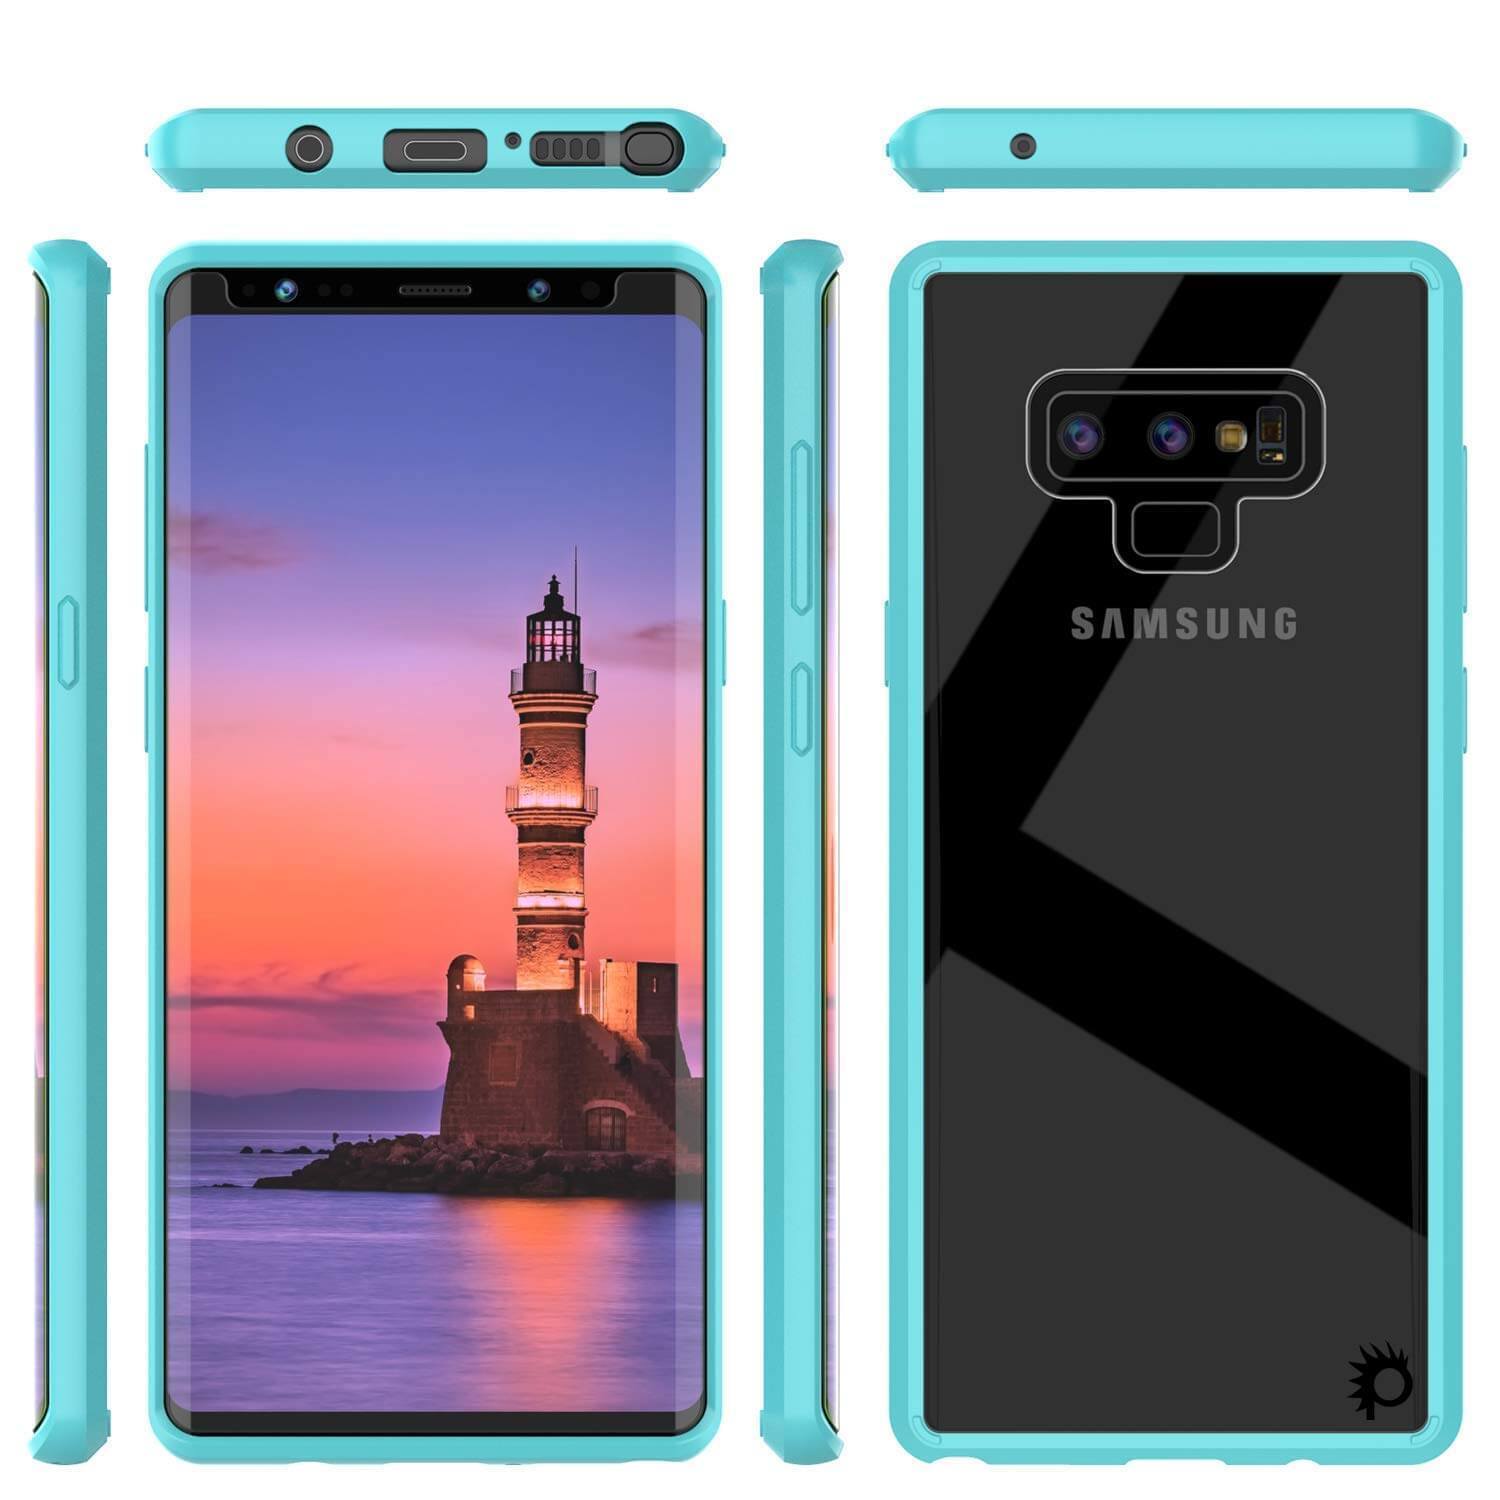 Galaxy Note 10+ Plus Punkcase Lucid-2.0 Series Slim Fit Armor Teal Case Cover